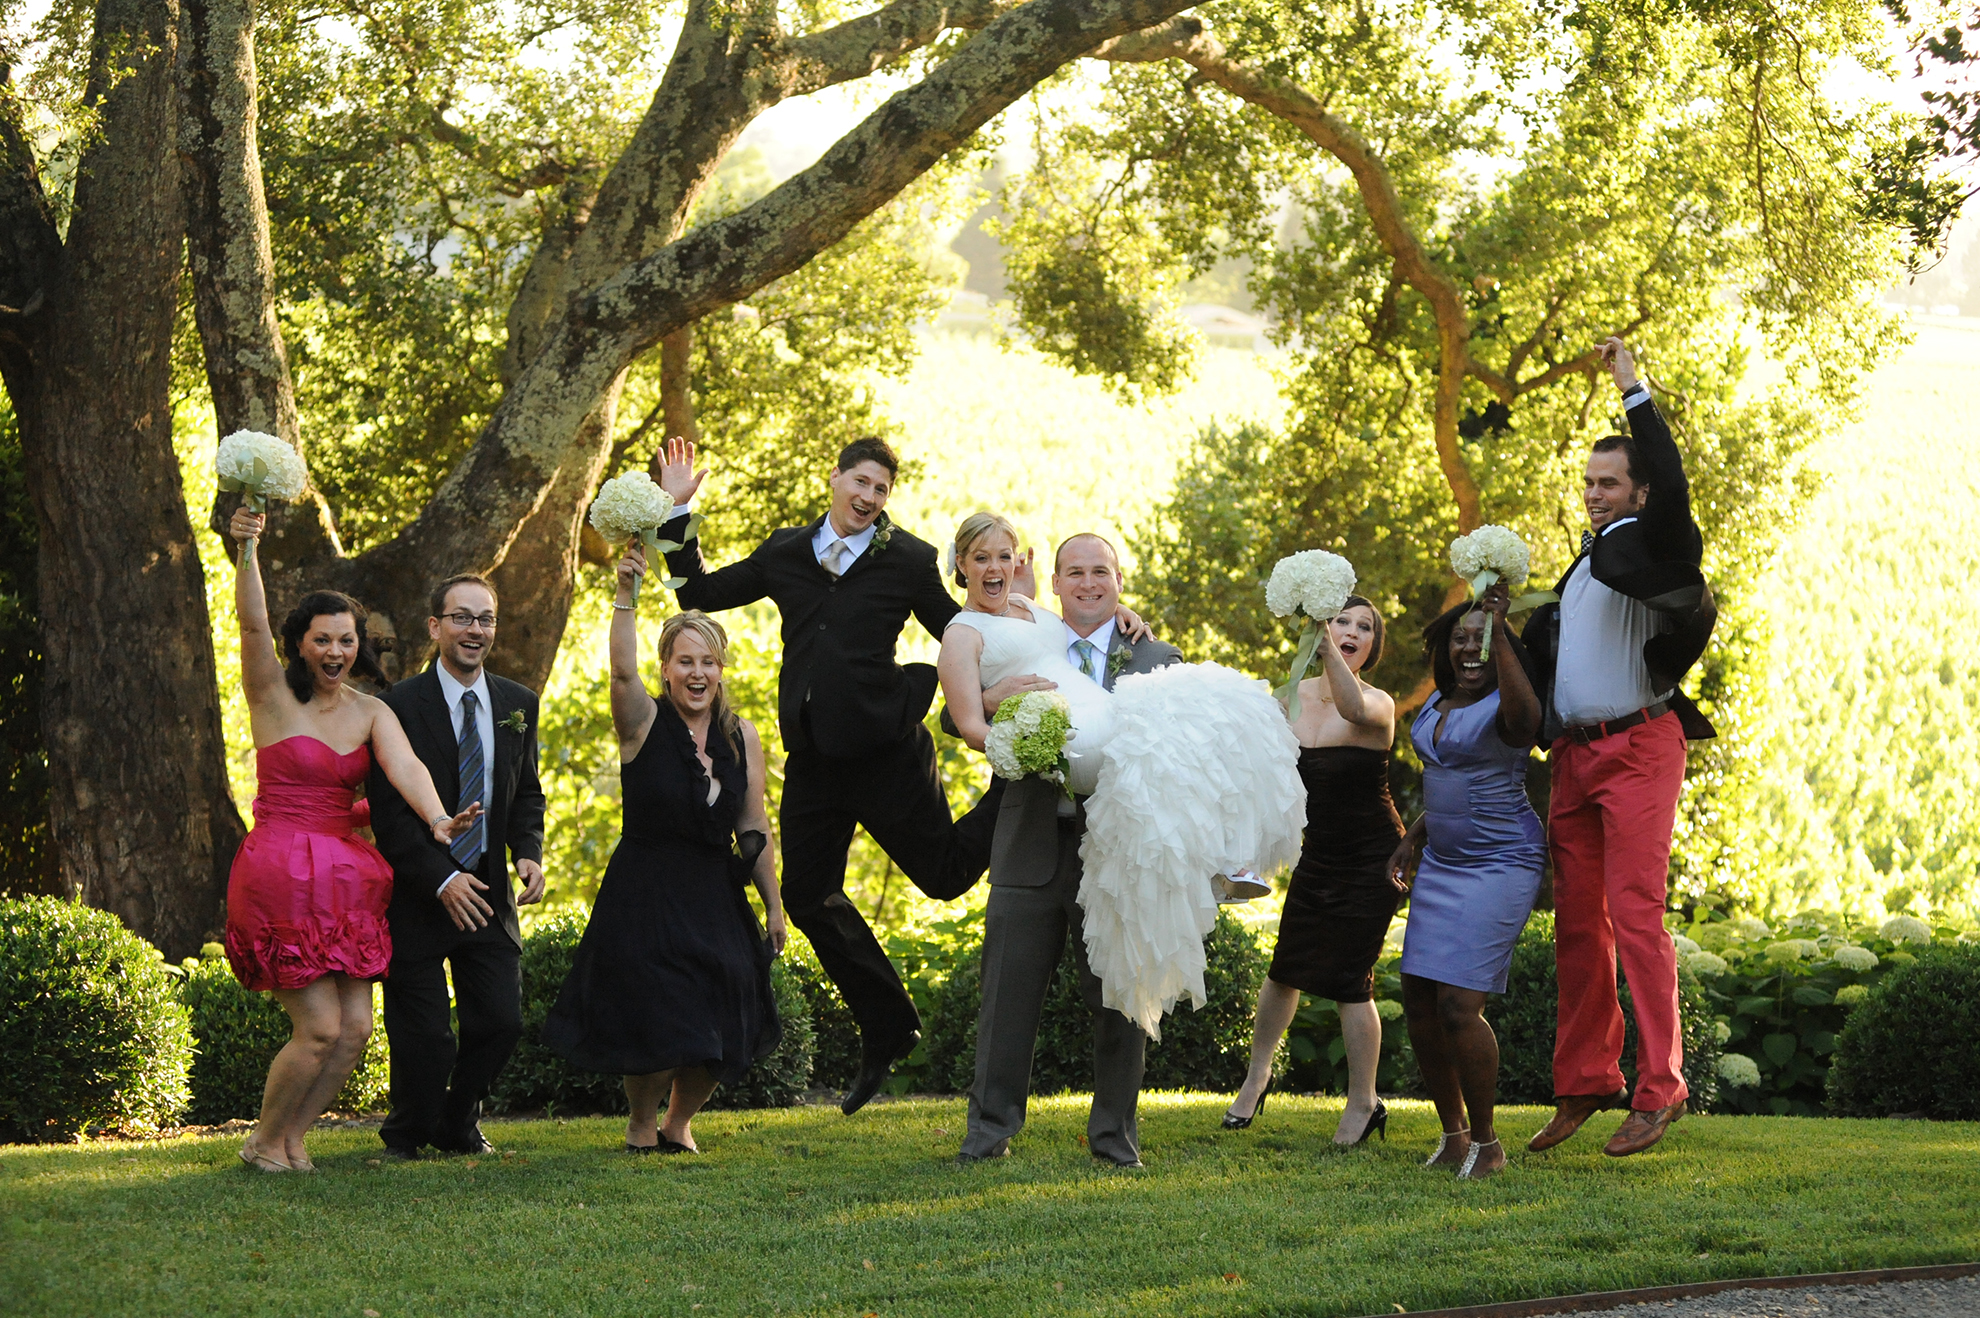 Bride, groom, and bridal party jumping